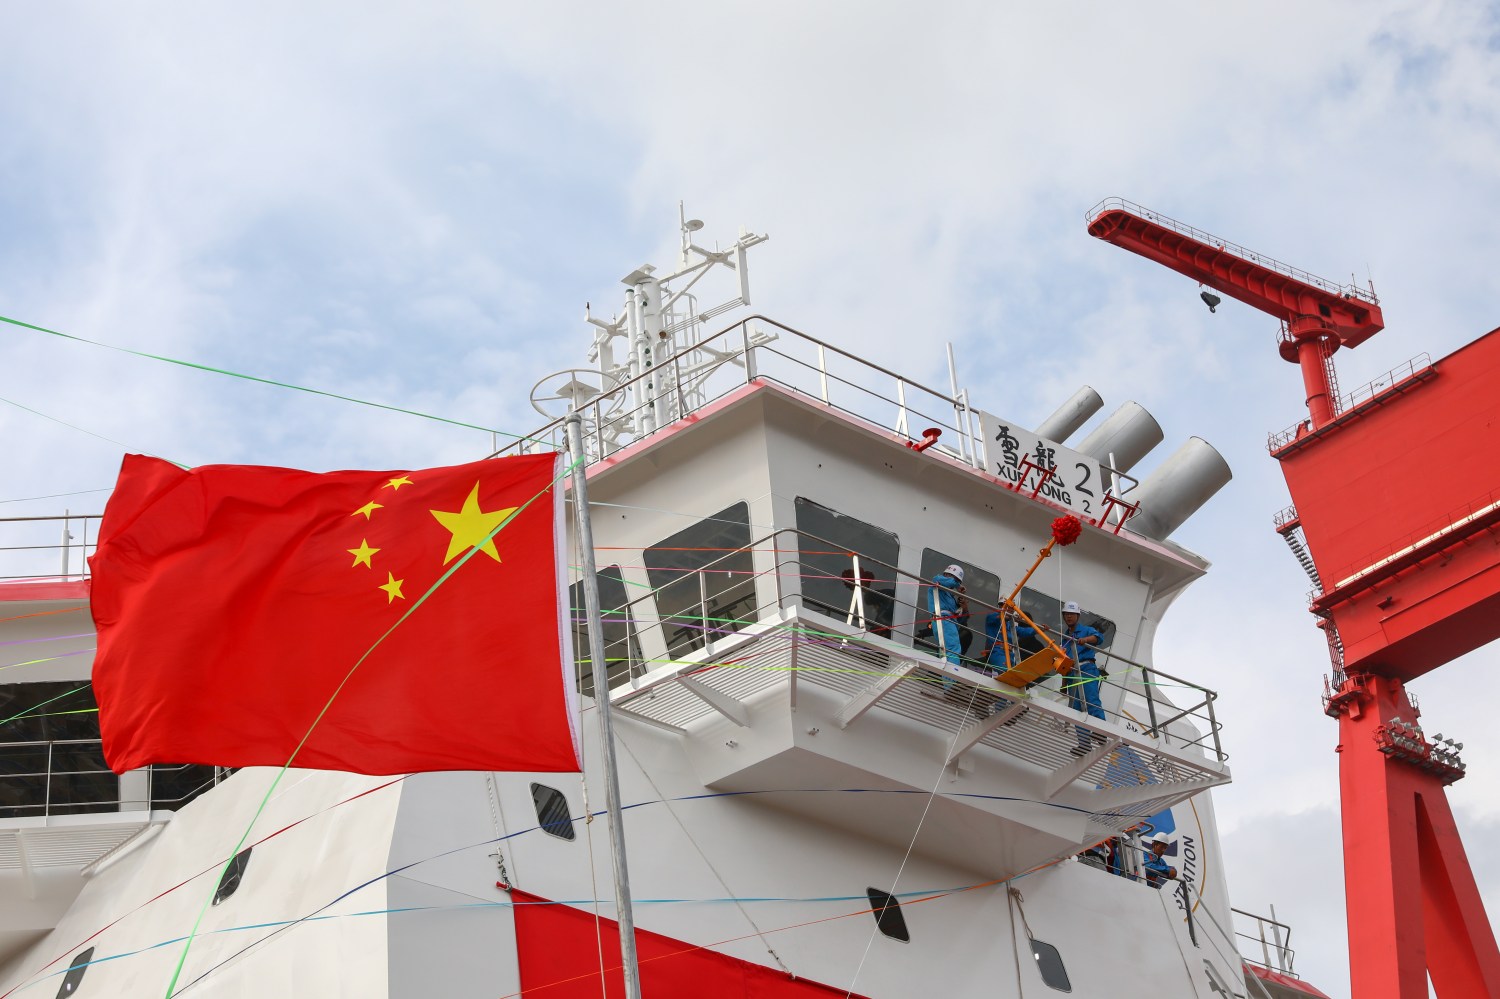 China's first domestically-built polar research vessel and icebreaker "Xuelong 2" prepares to take water at Jiangnan Shipyard in Chongming's Changxing Island in Shanghai, China, 10 September 2018.China's first wholly domestically conceived and built icebreaker Xuelong 2 took to the sea on Monday (10 September 2018) at Jiangnan Shipyard in Chongming's Changxing Island. Construction of the vessel began in December 20, 2016. Xuelong 2 will be put into service in the first half of 2019. It will team up with another icebreaker Xuelong on polar expeditions next year. The vessel is 122.5 meters in length and 22.3 meters wide, with a draught of 7.85 meters and displacement of 13,990 tons. It can reach 15 knots and it has a range of 20,000 nautical miles. Xuelong 2 can break 1.5-meter ice with a thick covering of snow at speeds of 2 to 3 knots. Its combines the requirements of a new-generation research vessel with environmental protection having an azimuthing electric propulsion system. Researchers can make observations of environmental elements like the ocean water, sea ice and polar air from the vessel and take samples from the marine environment in connection with climate change.No Use China. No Use France.